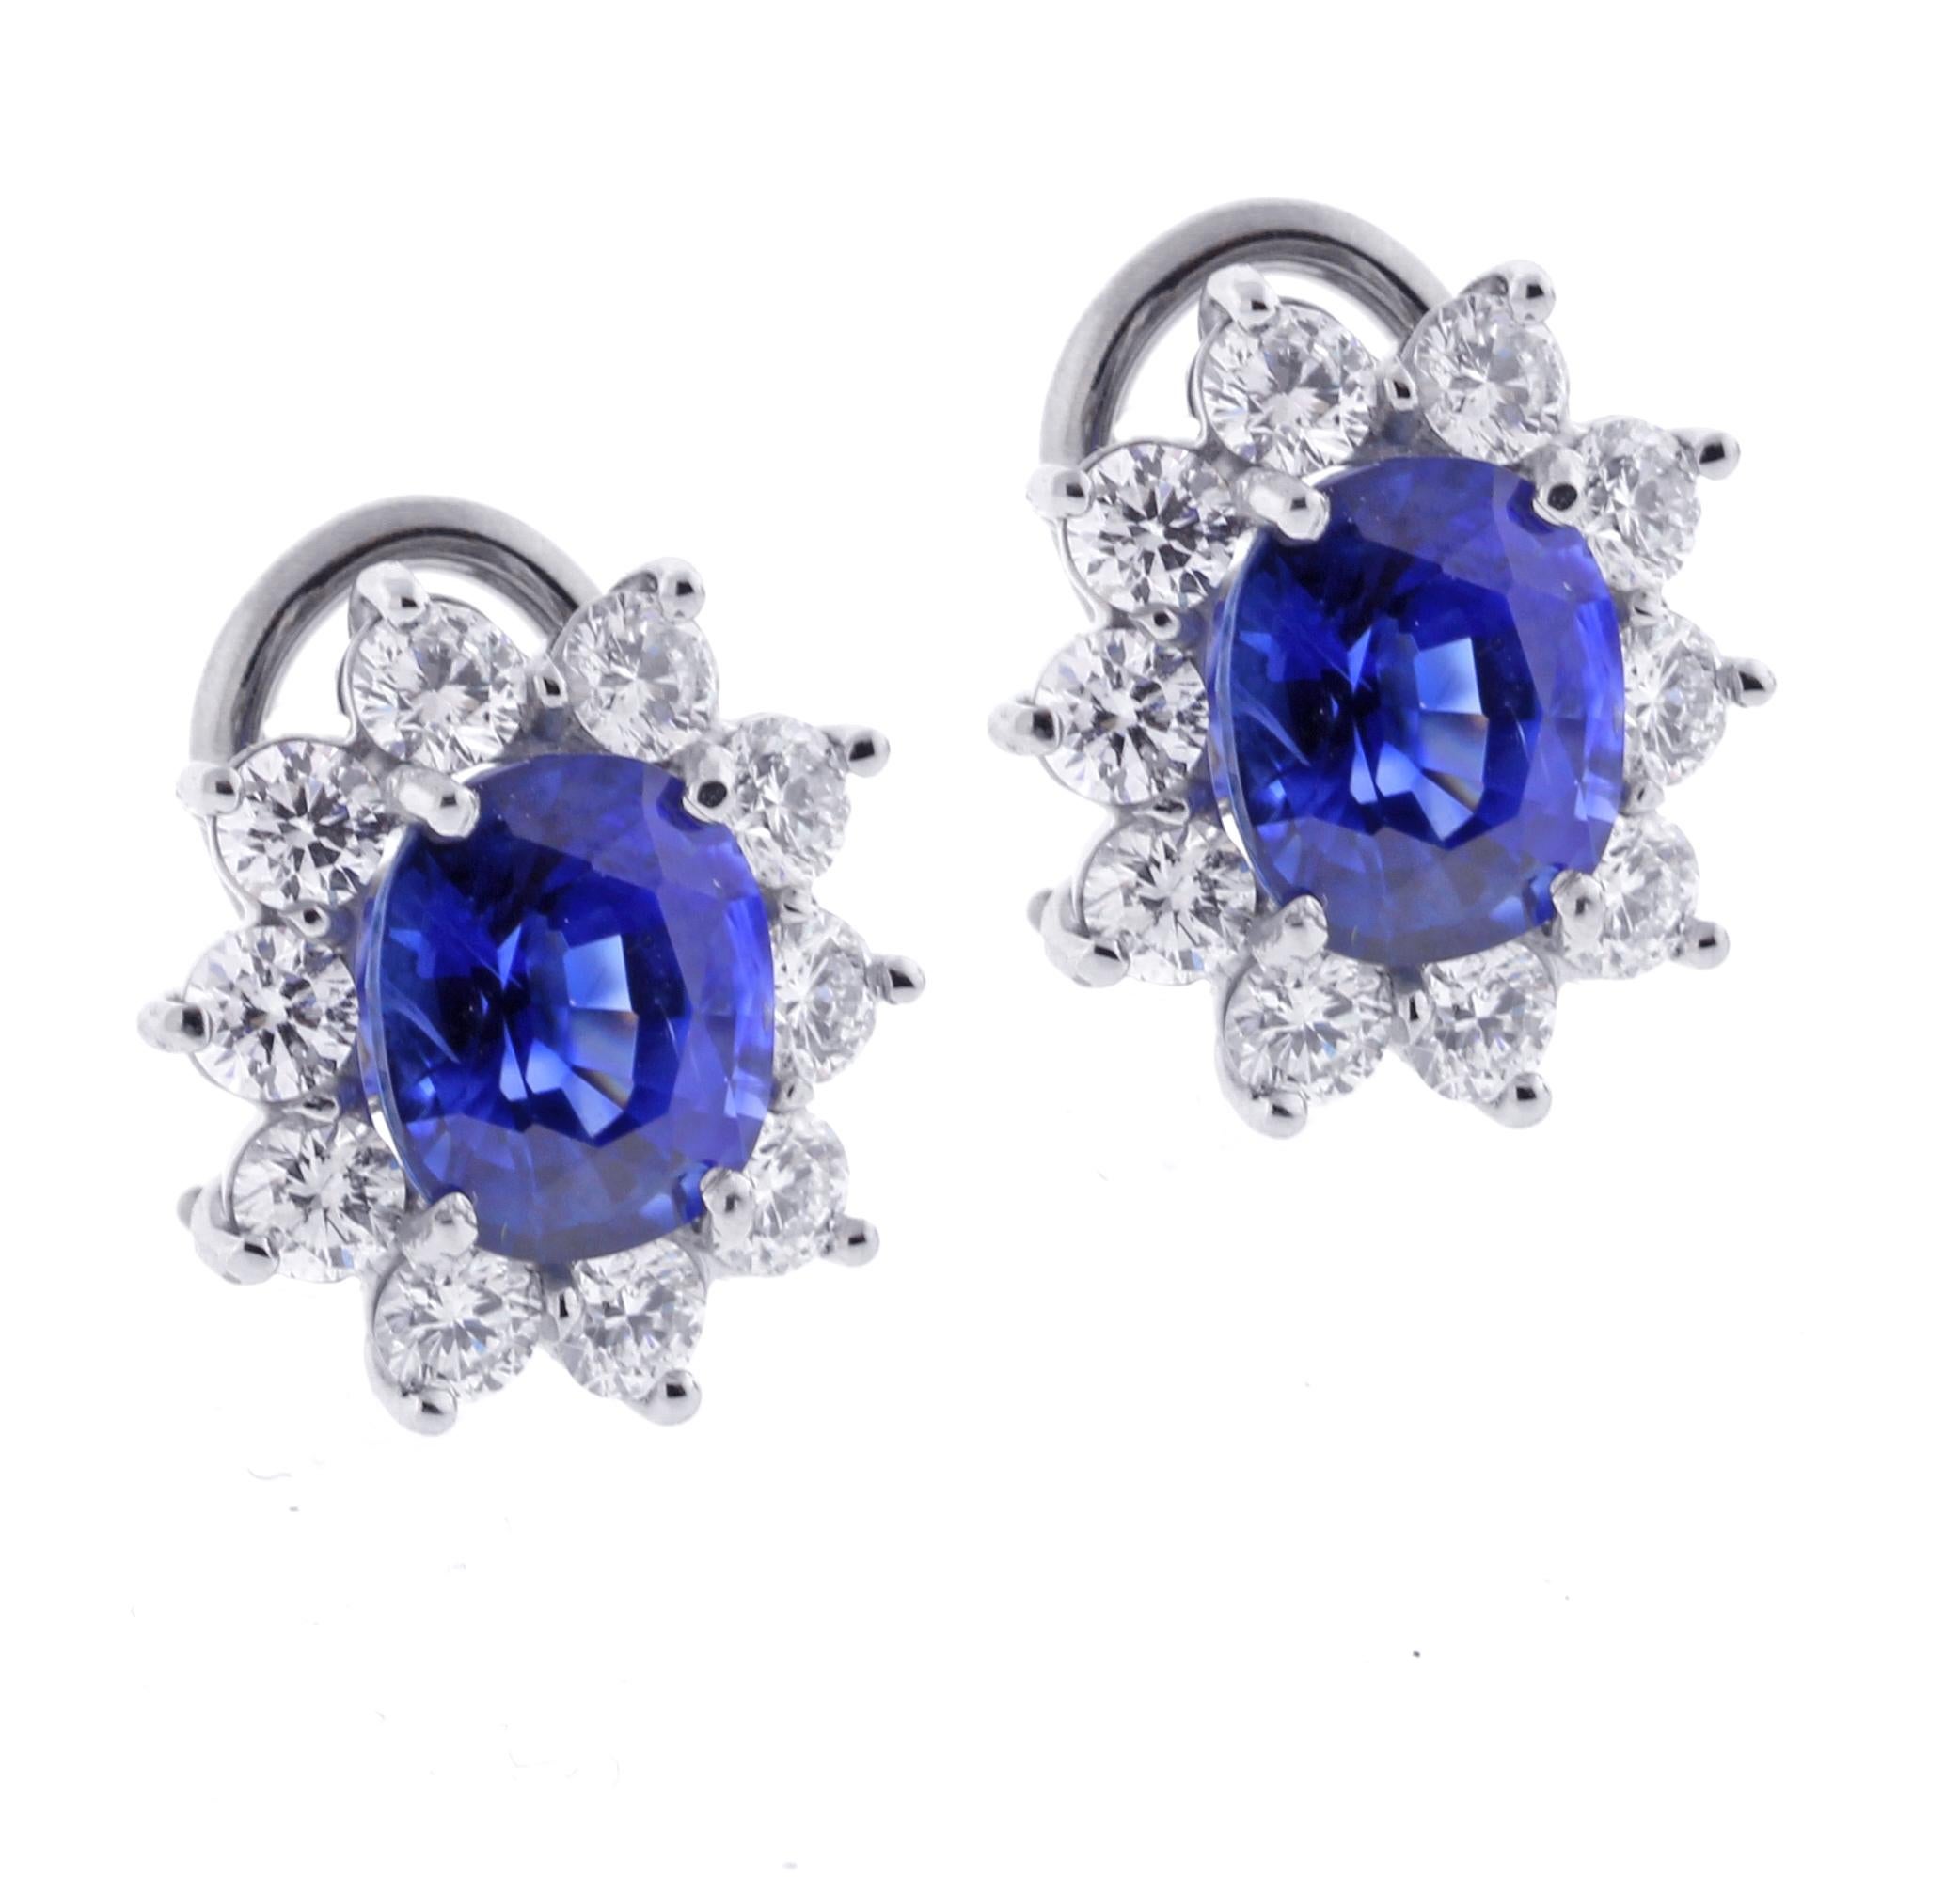 From the master jewelers of Pampillonia, a pair of oval sapphire and diamond cluster earrings.
♦ Designer: Pampillonia 
♦ Metal: Platinum
♦ 2 Oval sapphires=4.08 Heated
♦20Diamonds=1.41 carat G VS
♦ Circa 2000
♦ Size 6, Resizable
♦ Packaging: